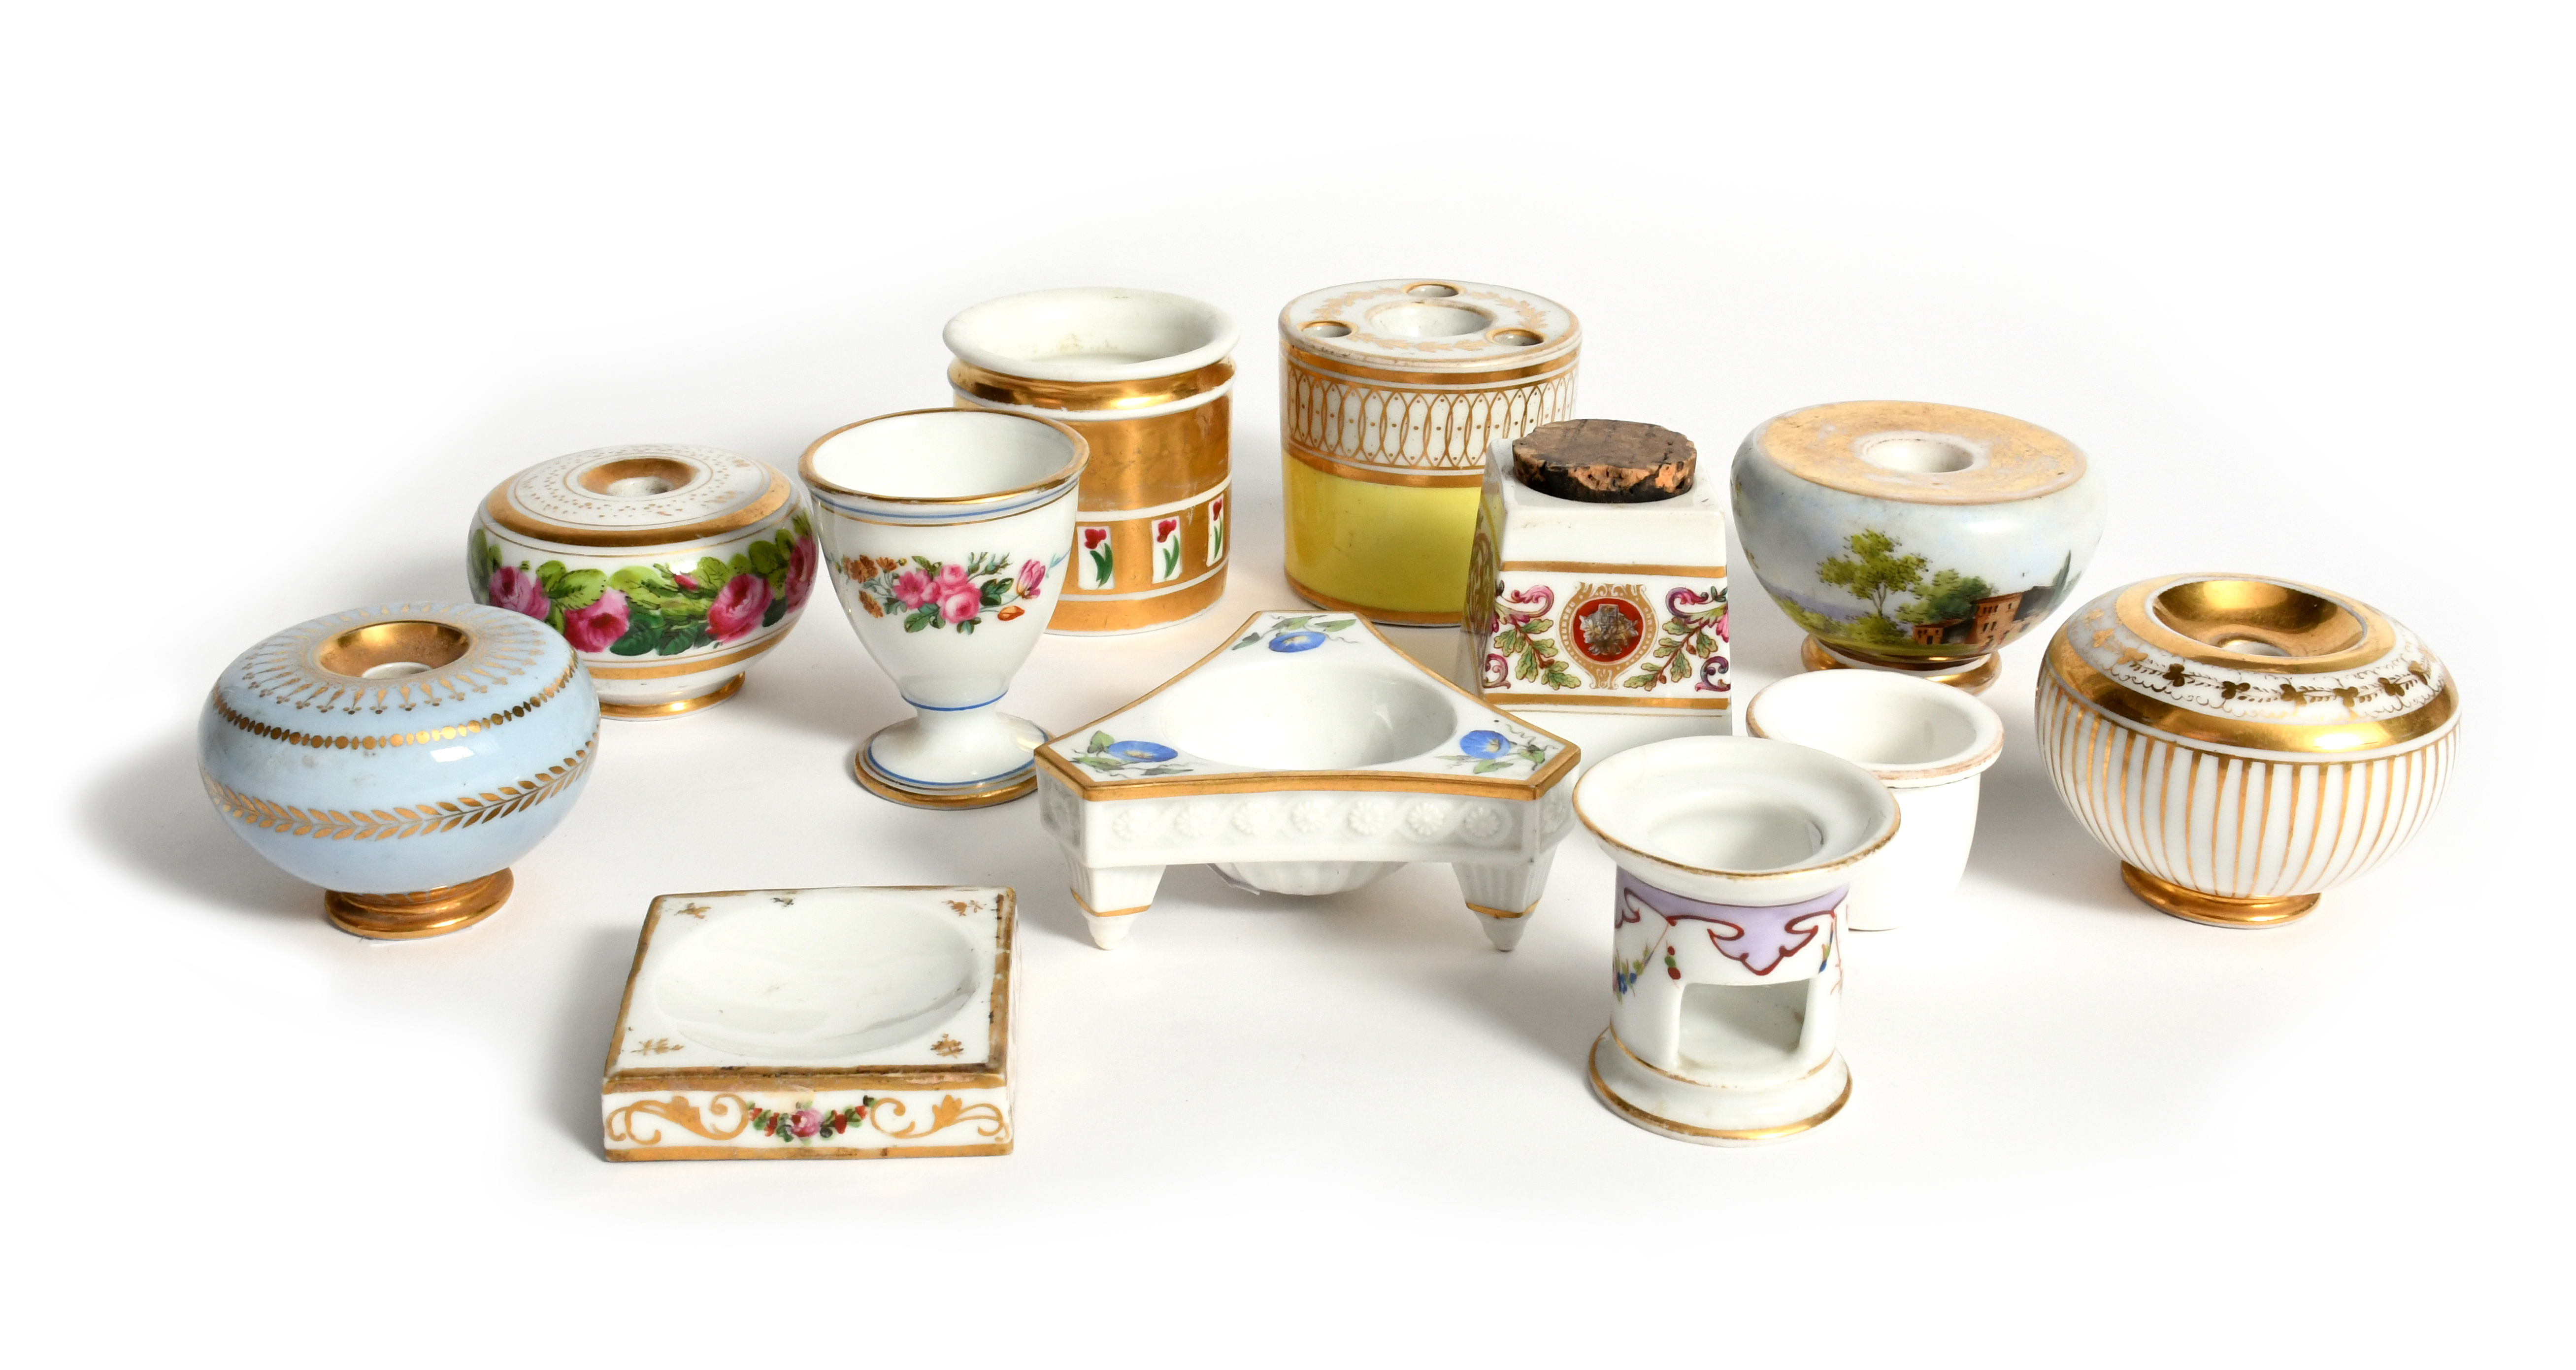 Six porcelain inkwells (Paris and English) 19th century, variously decorated with flowers, a